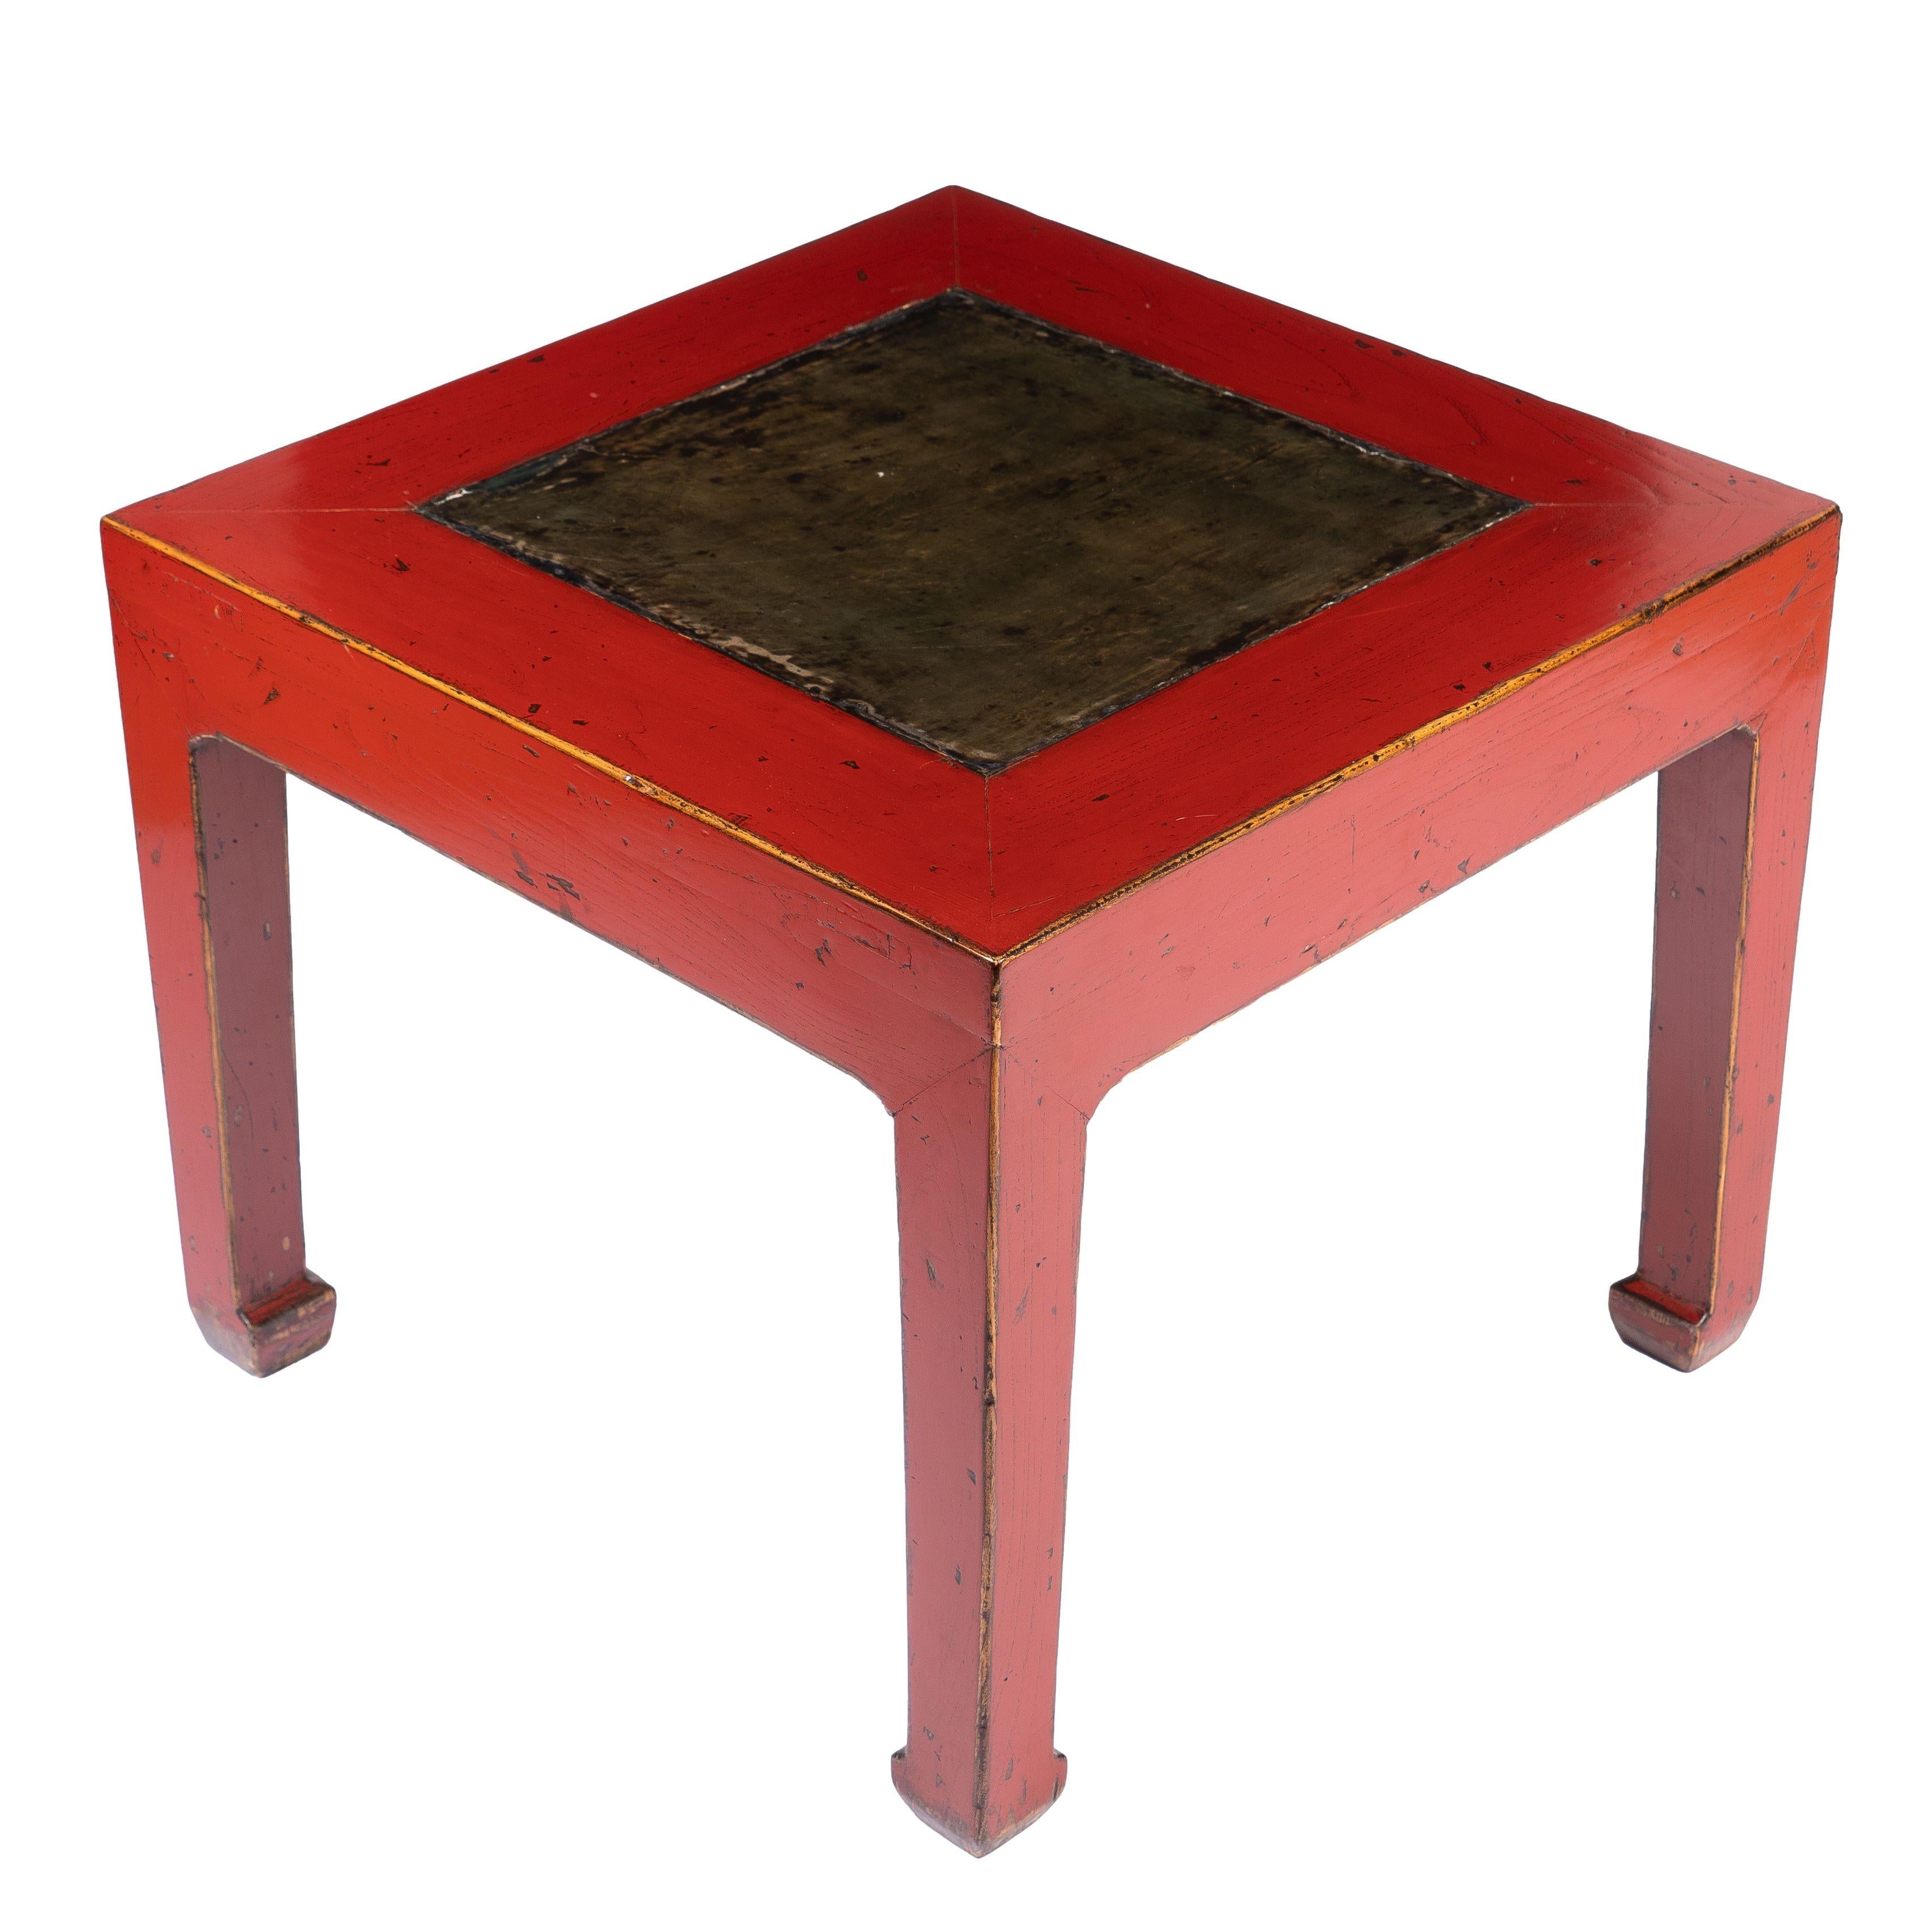 Red lacquered square table fitted with a stone center panel. The waistless table top is supported by four square legs with hoof foot. Fitted with an earlier calligraphy stone.
China, circa 1900.